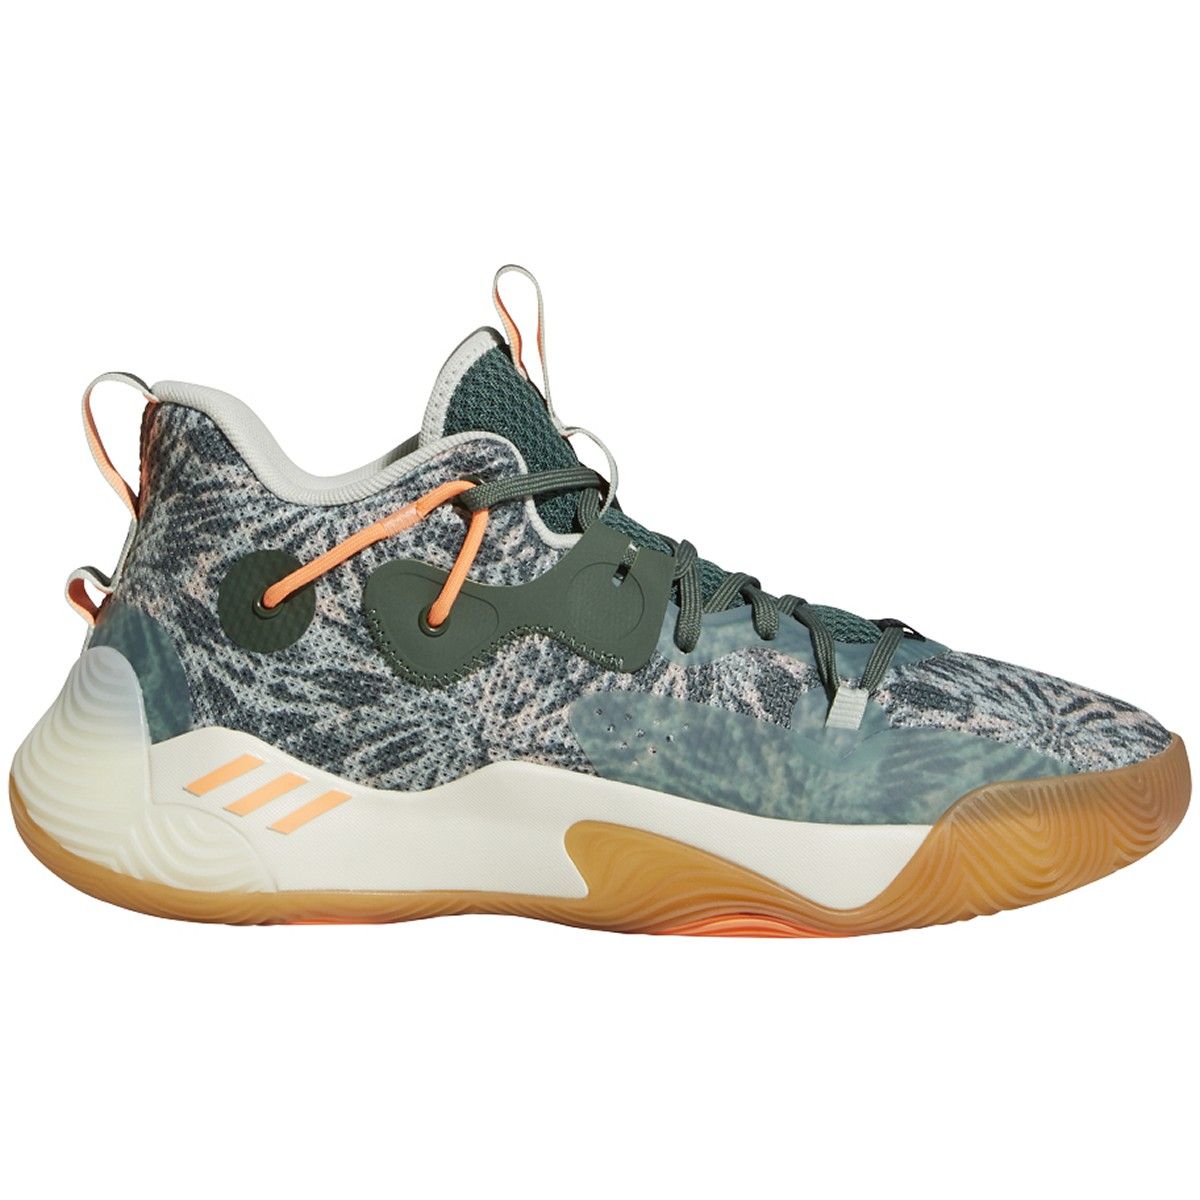 adidas Harden Stepback 3 Mens Basketball Shoes in Camo